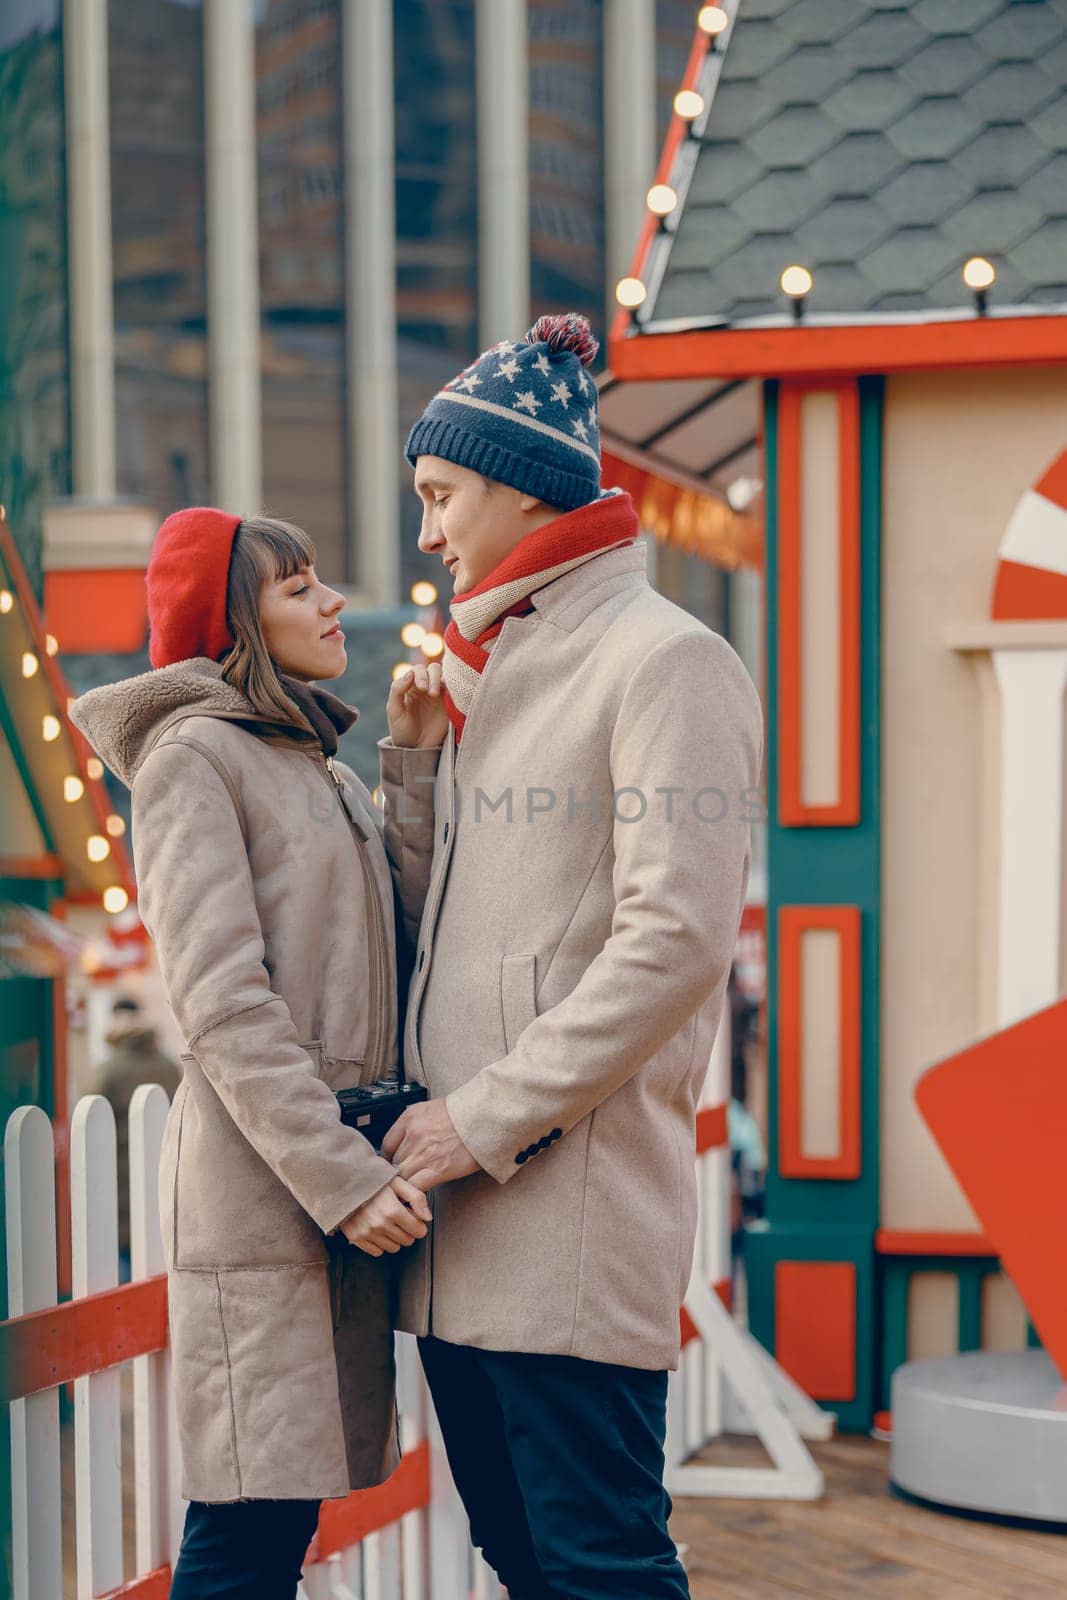 In a holiday setting, a couple shares a tender moment, connecting deeply amidst the lively charm of a Christmas market